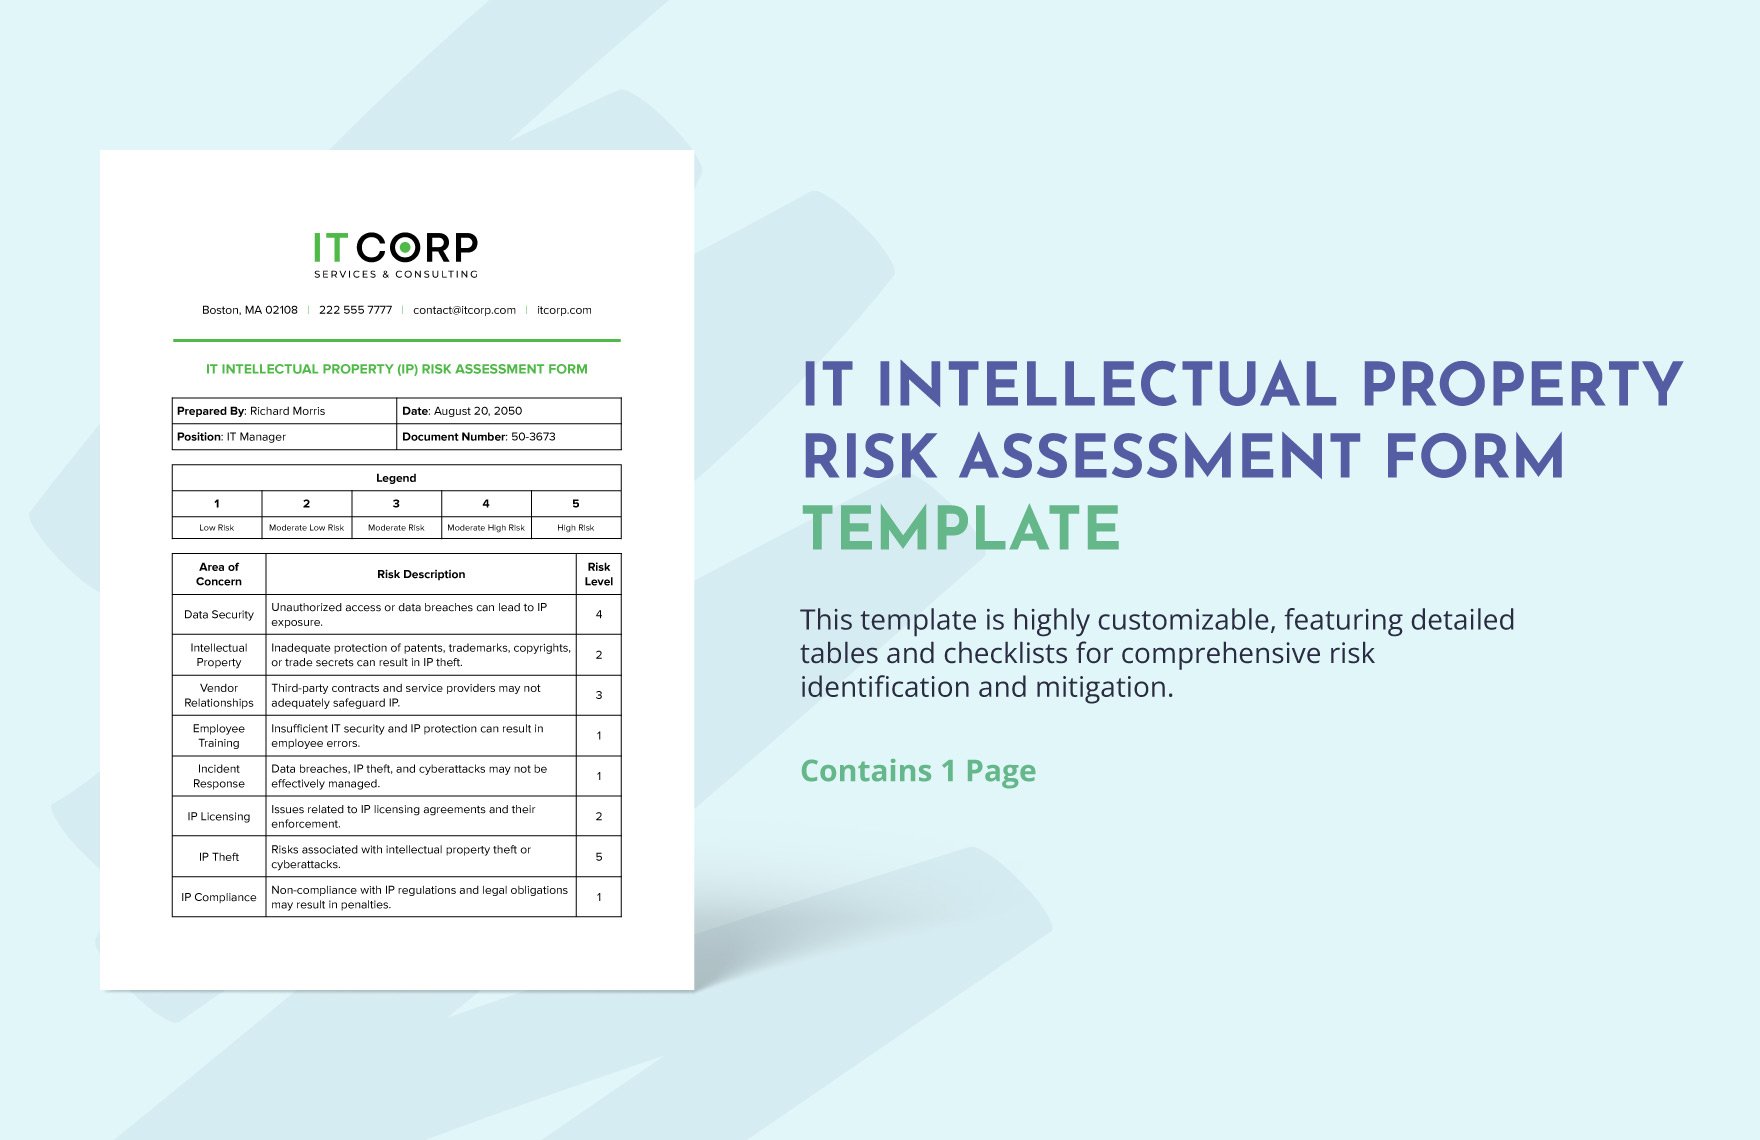 IT Intellectual Property Risk Assessment Form Template